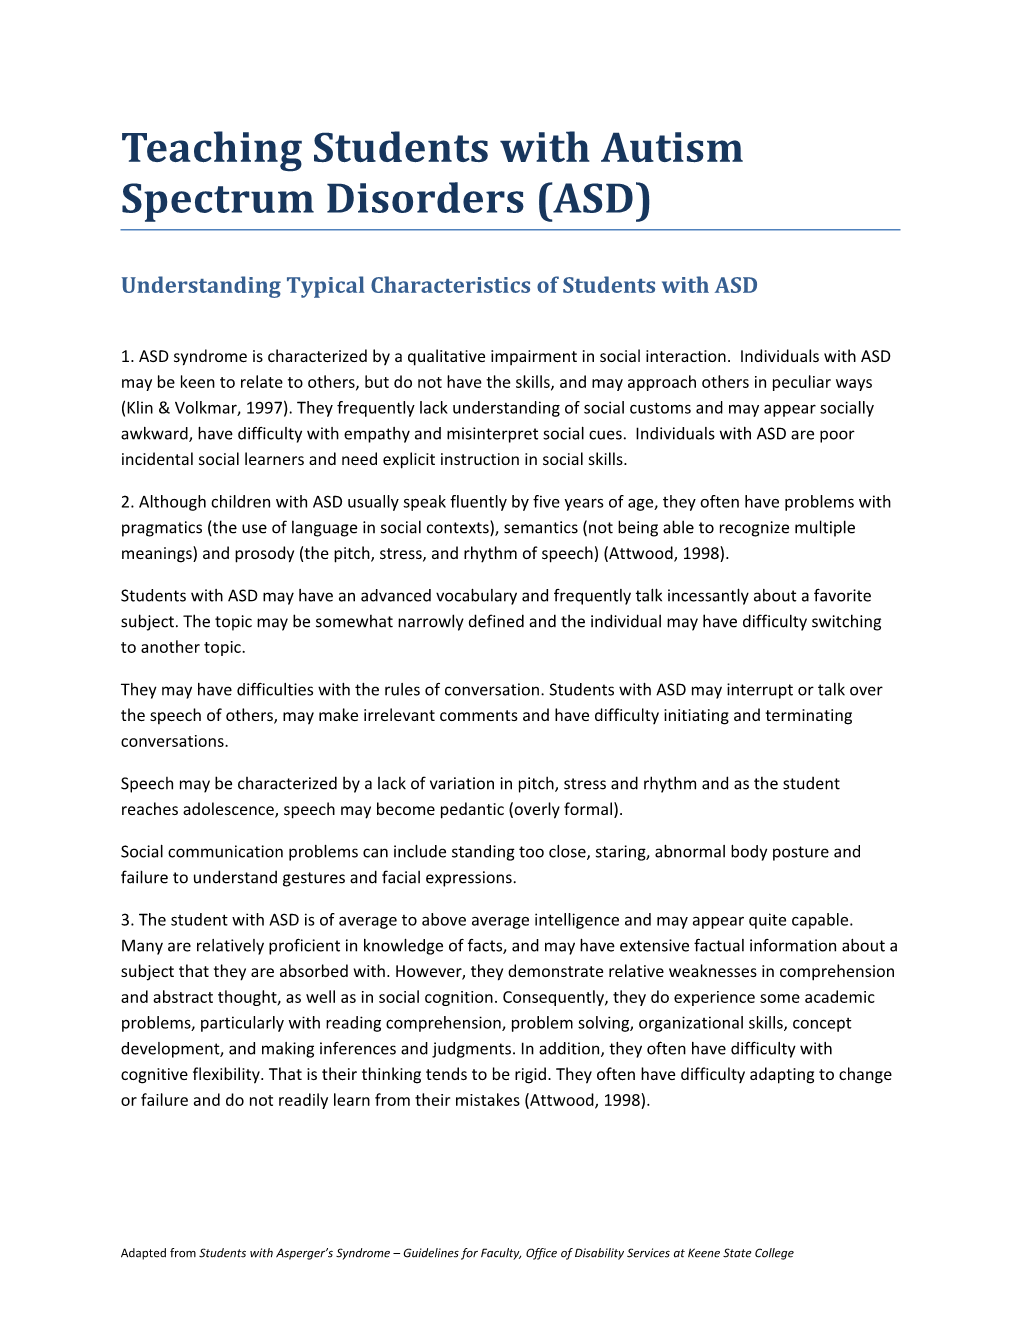 Teaching Students with Autism Spectrum Disorders (ASD)